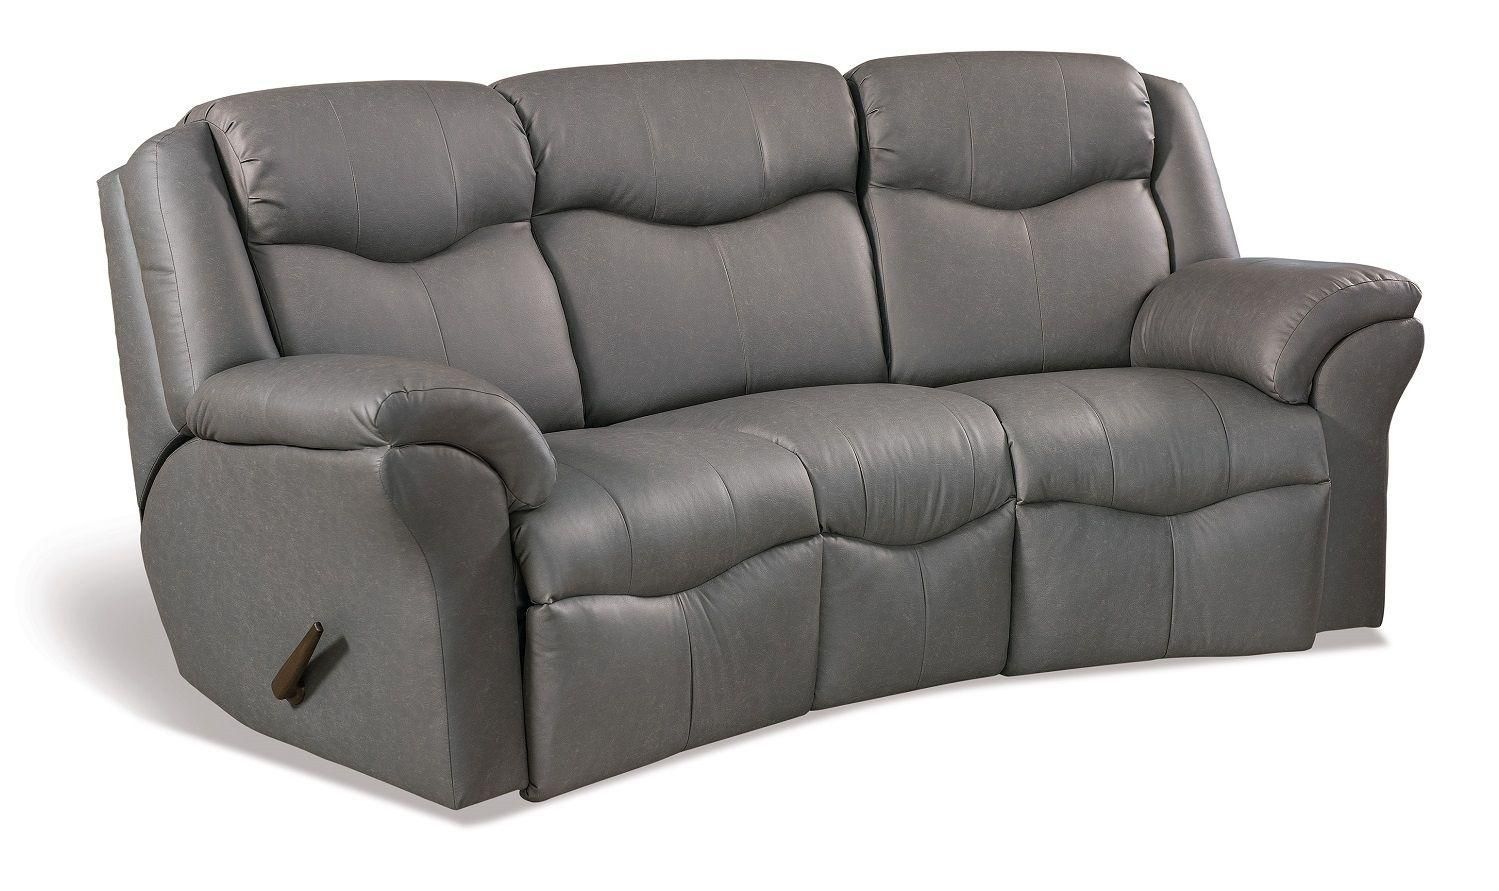 Kenwood Curved Reclining Sofa – Countryside Amish Furniture Inside Curved Recliner Sofa (View 14 of 20)